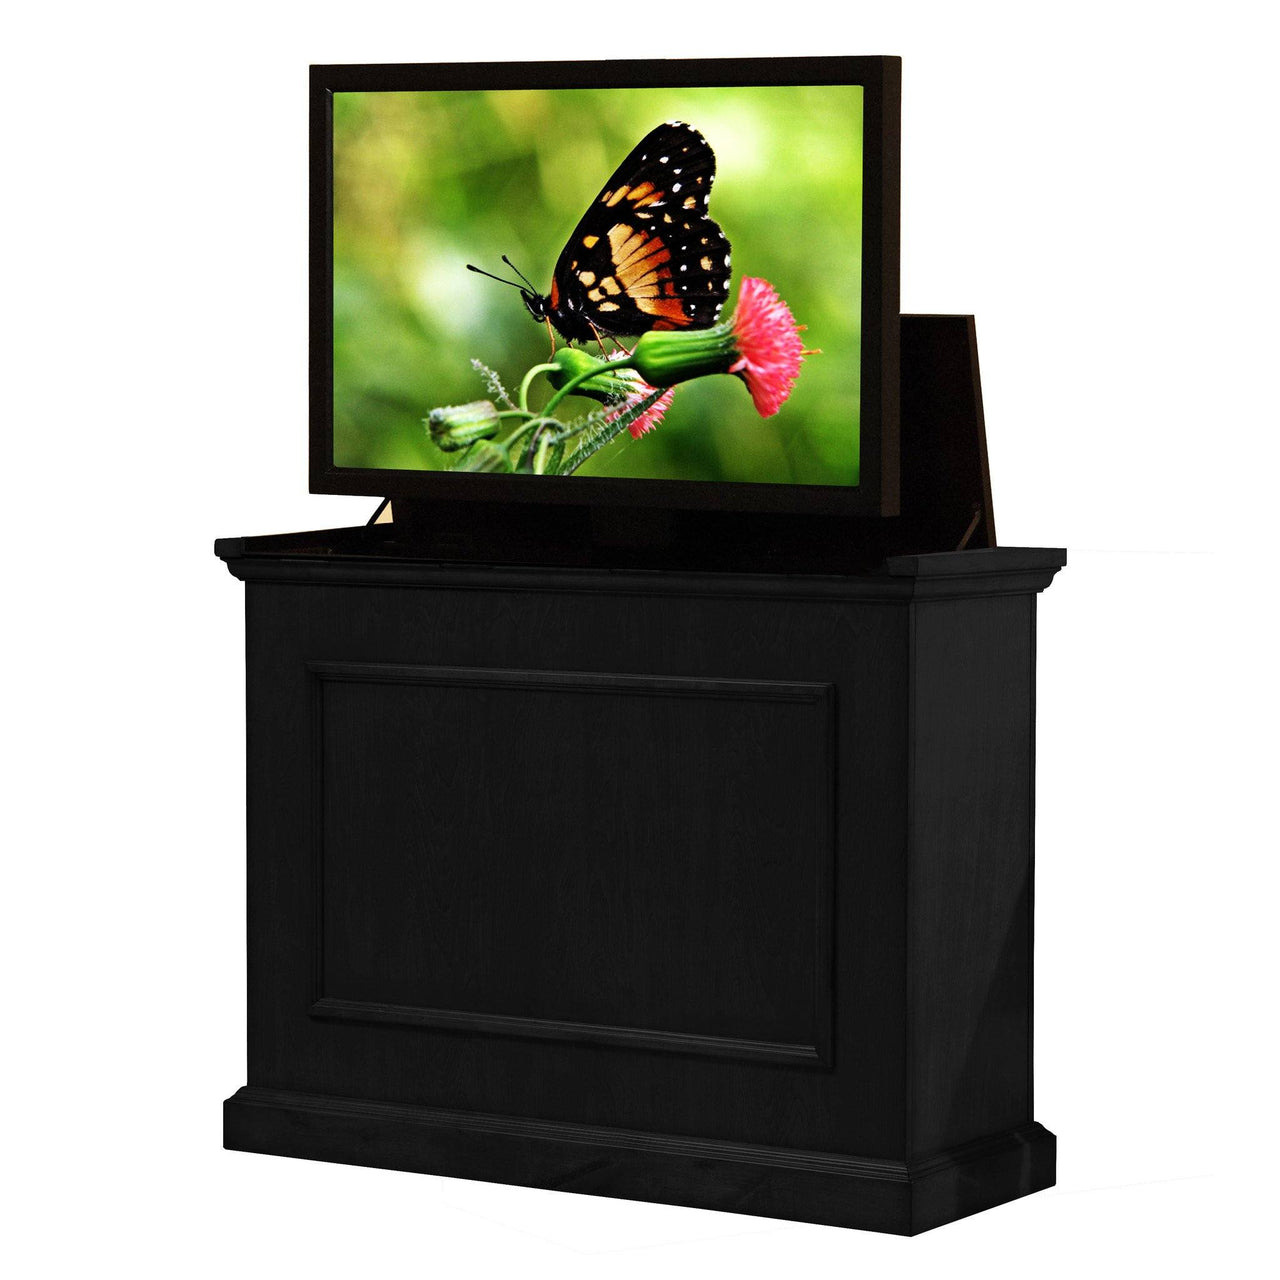 Touchstone Elevate - Black Tv Lift Cabinets For Up To 42” Flat Screen Tv’S Tv Lift Cabinets Touchstone 